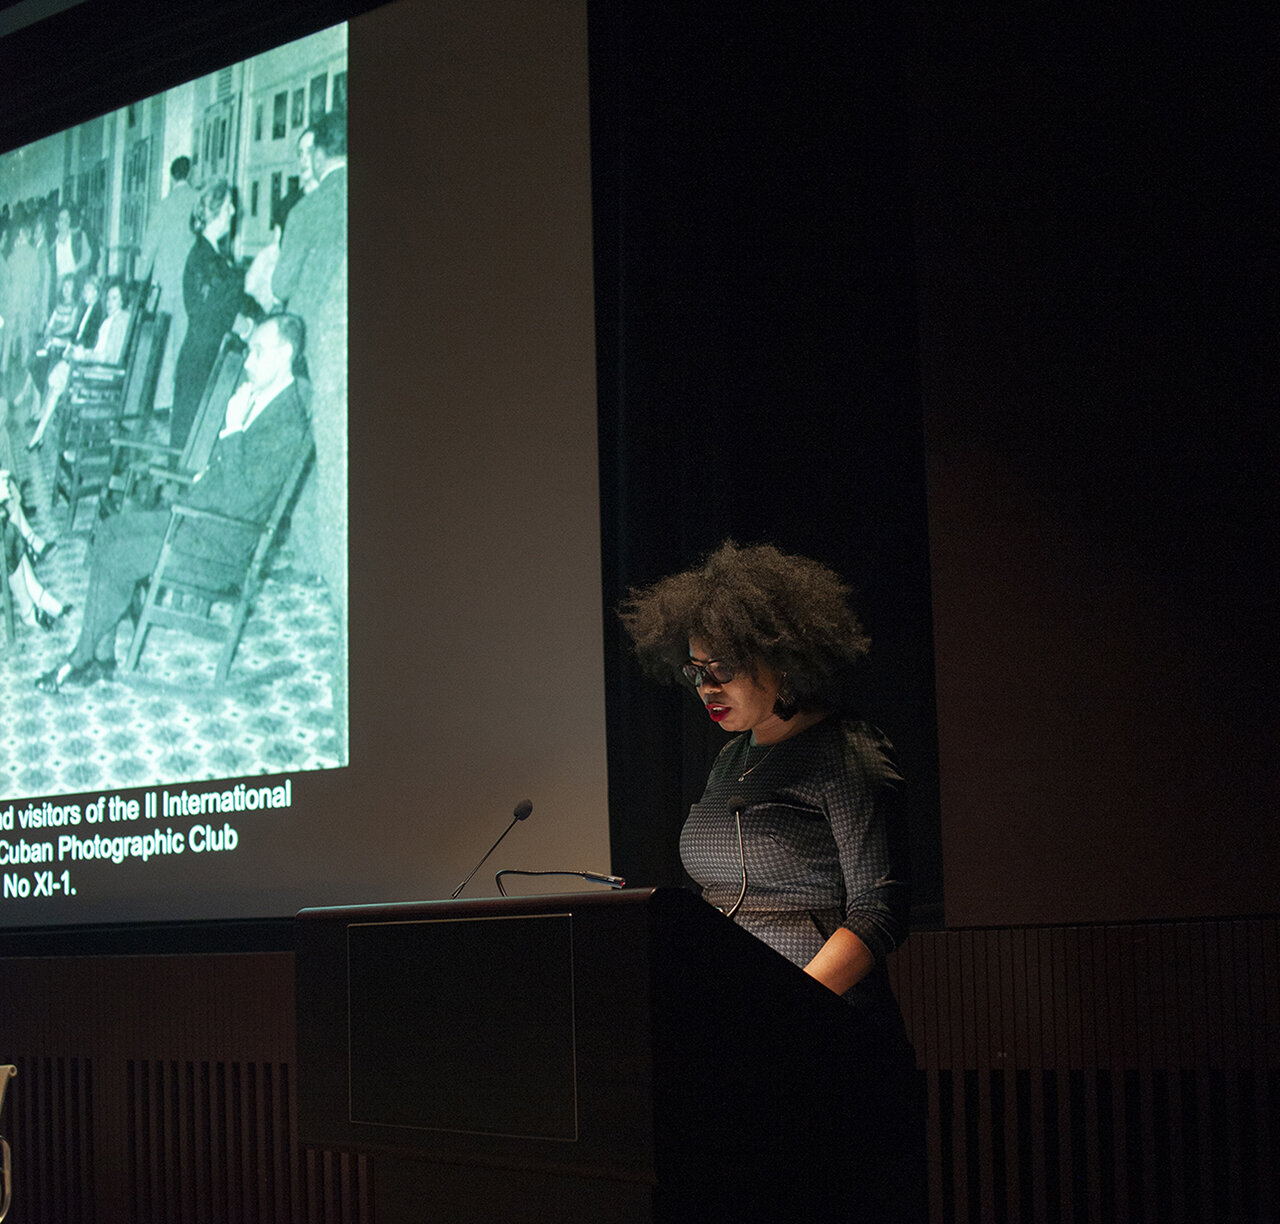  Aldeide Delgado lecturing at Tate Modern during the “Fast Forward: How do Women Work” conference, 2019. Photo by Emily Light. 